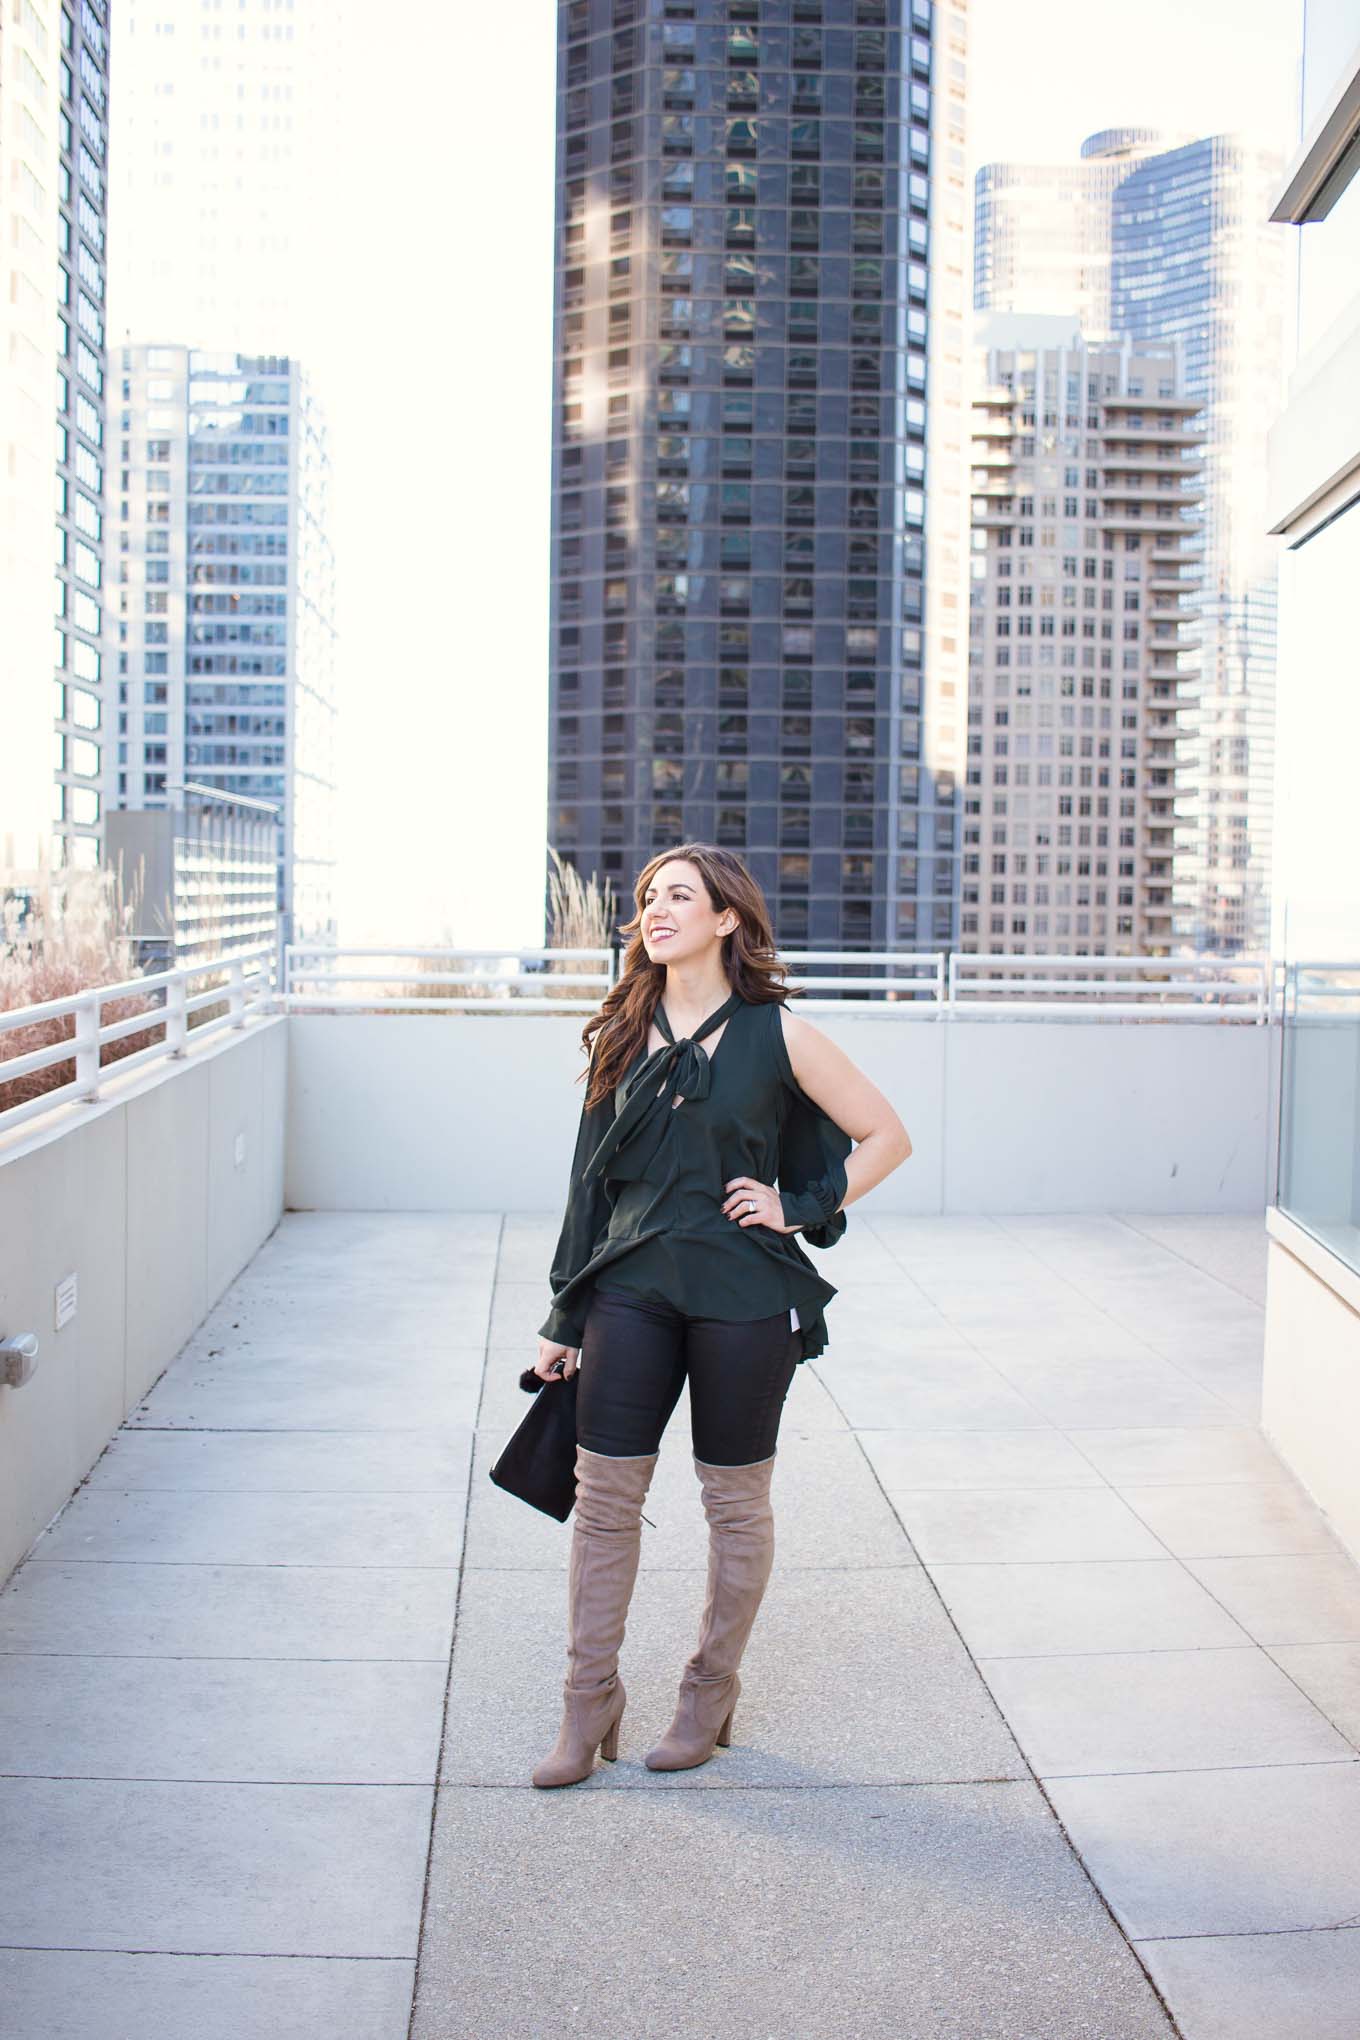 Lifestyle blogger Roxanne of Glass of Glam wearing a Le Tote green top, coated denim, cat clutch, and steve madden boots